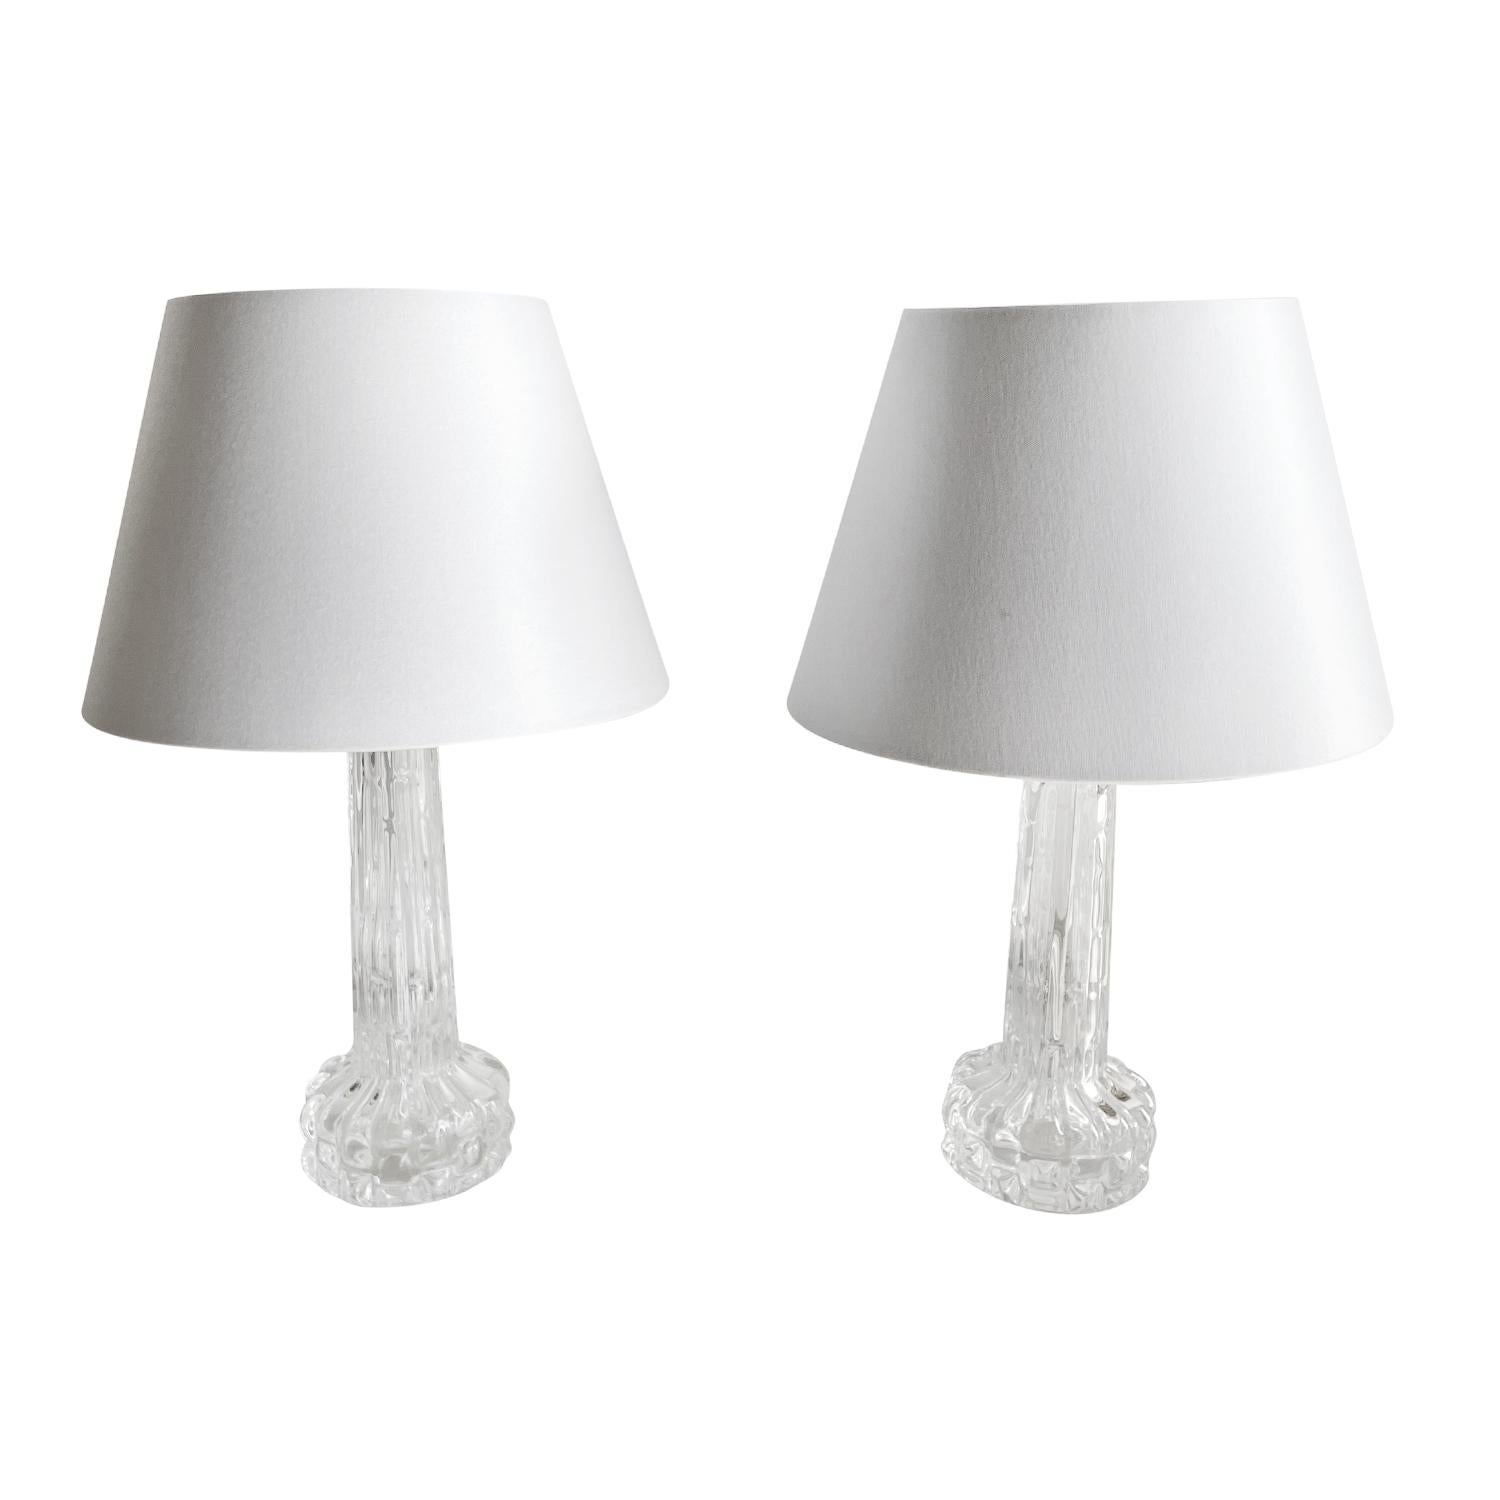 A vintage Mid-Century Modern Swedish pair of table lamps with a new round white shade, enhanced by chrome rings at the top of the stem, made hand blown clear Orrefors glass in good condition. Designed by Carl Fagerlund and produced, signed at the